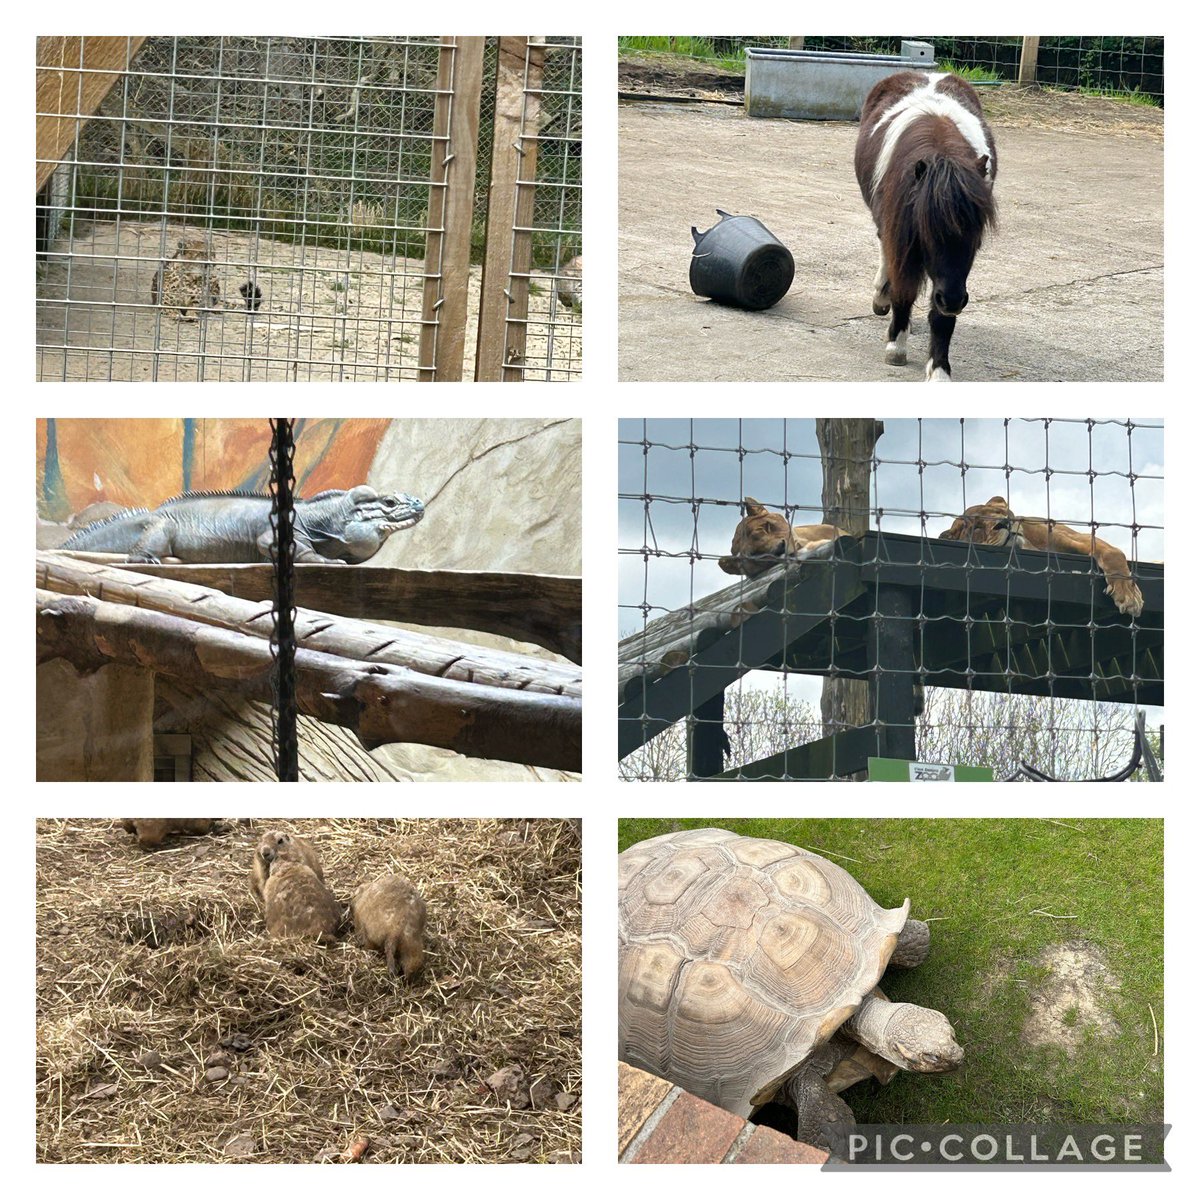 We had such a lovely day at Five Sisters Zoo today! The weather was perfect and so were the animals! Well done #P7Team I am so proud of how well you all behaved today. #SummerTerm #SchoolTrip #Fun #Friendships 😊💙